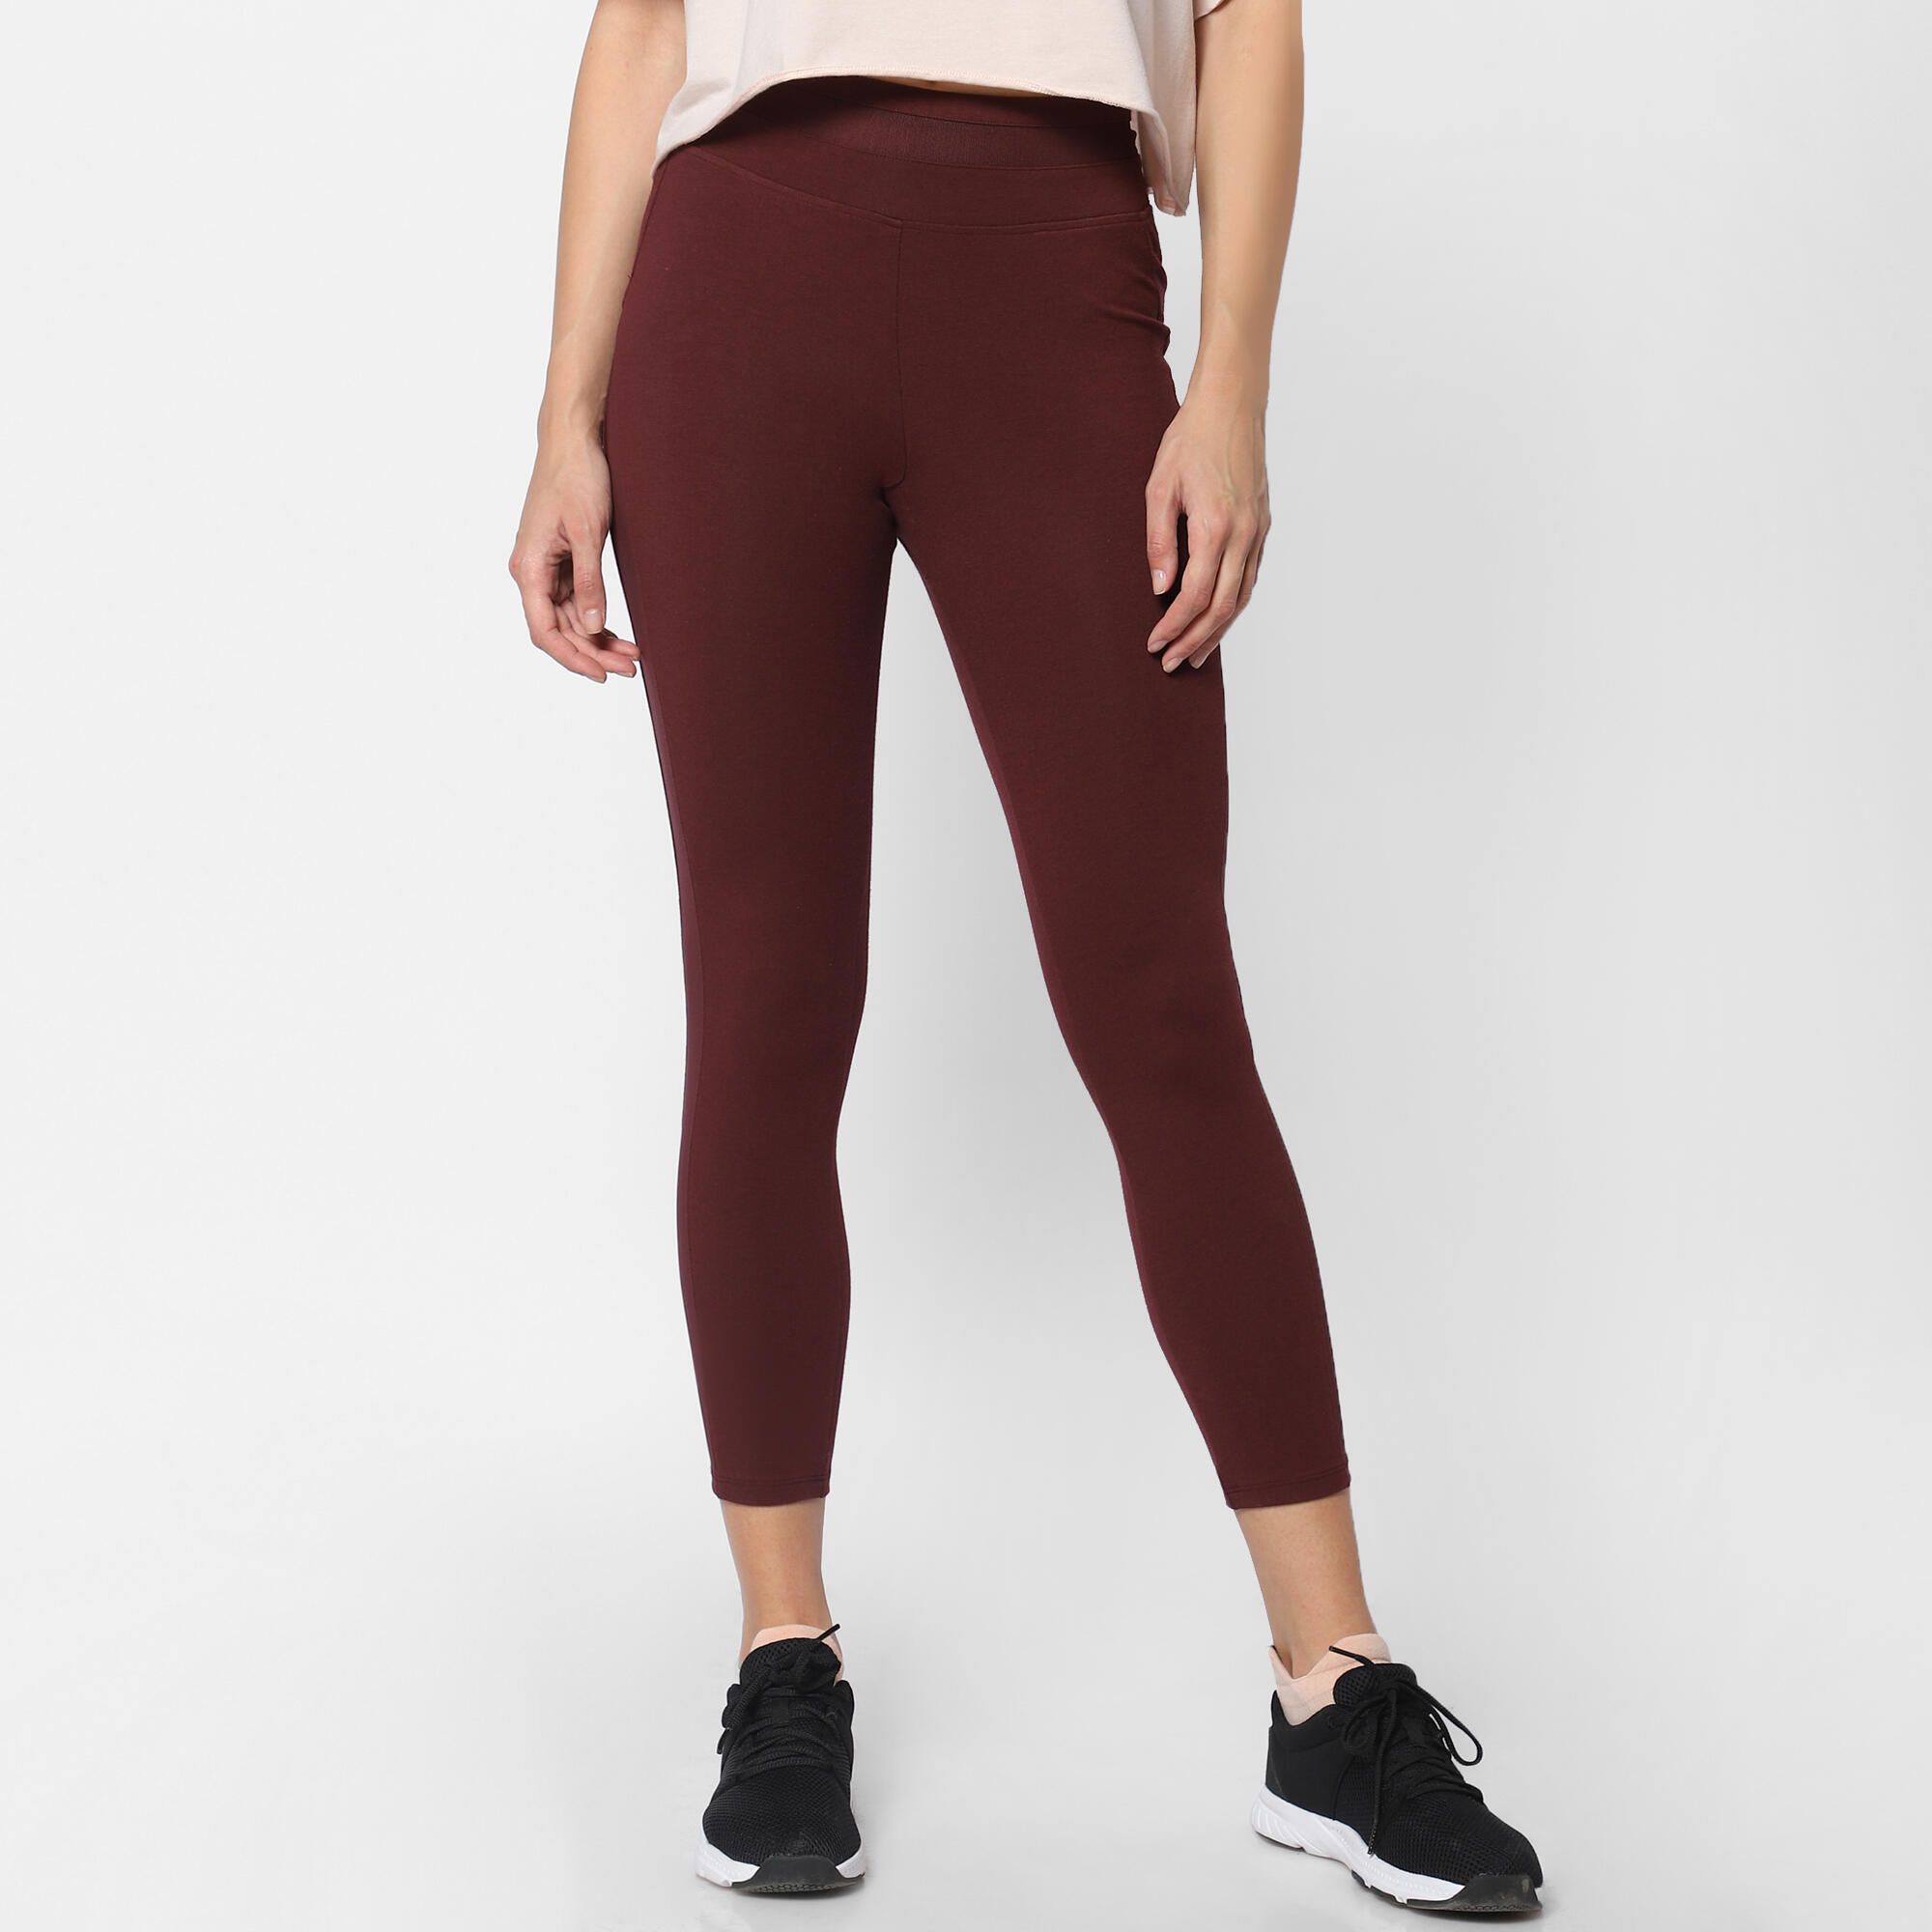 Buy Faricon Maroon Jeggings Tights for Women|Gym|Yoga Workout| Sports  Fitness Online at Best Prices in India - JioMart.